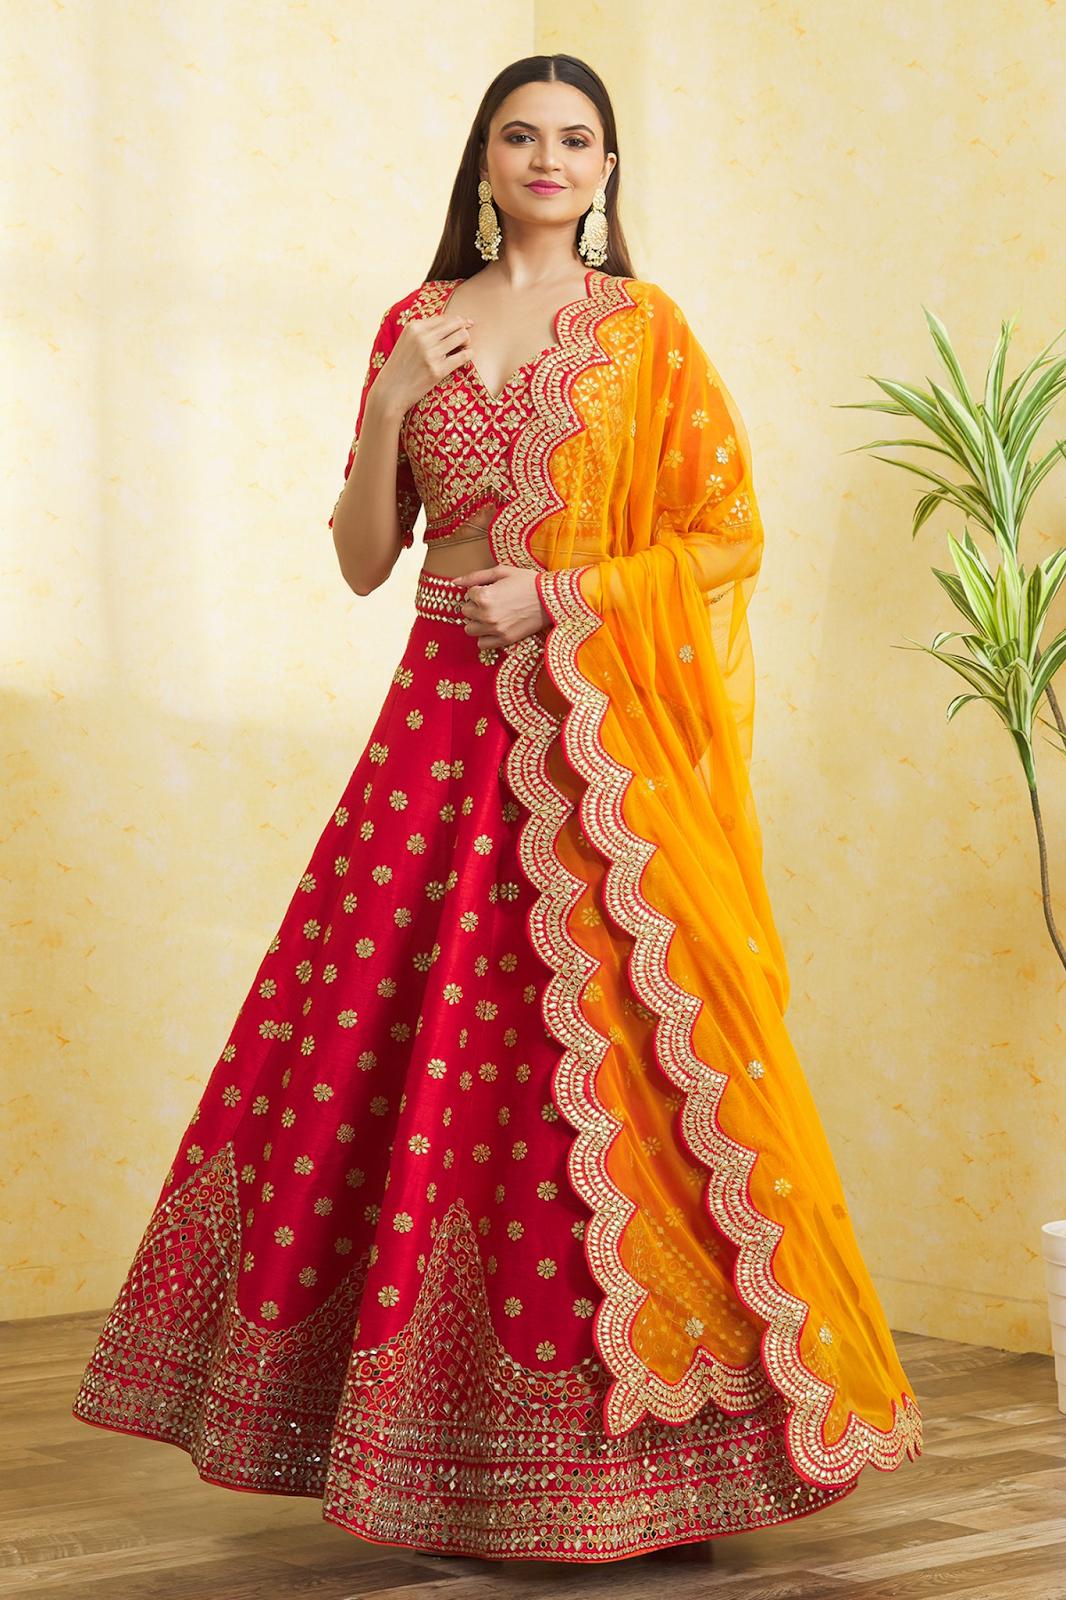 Why Do Indian Brides Wear Red?